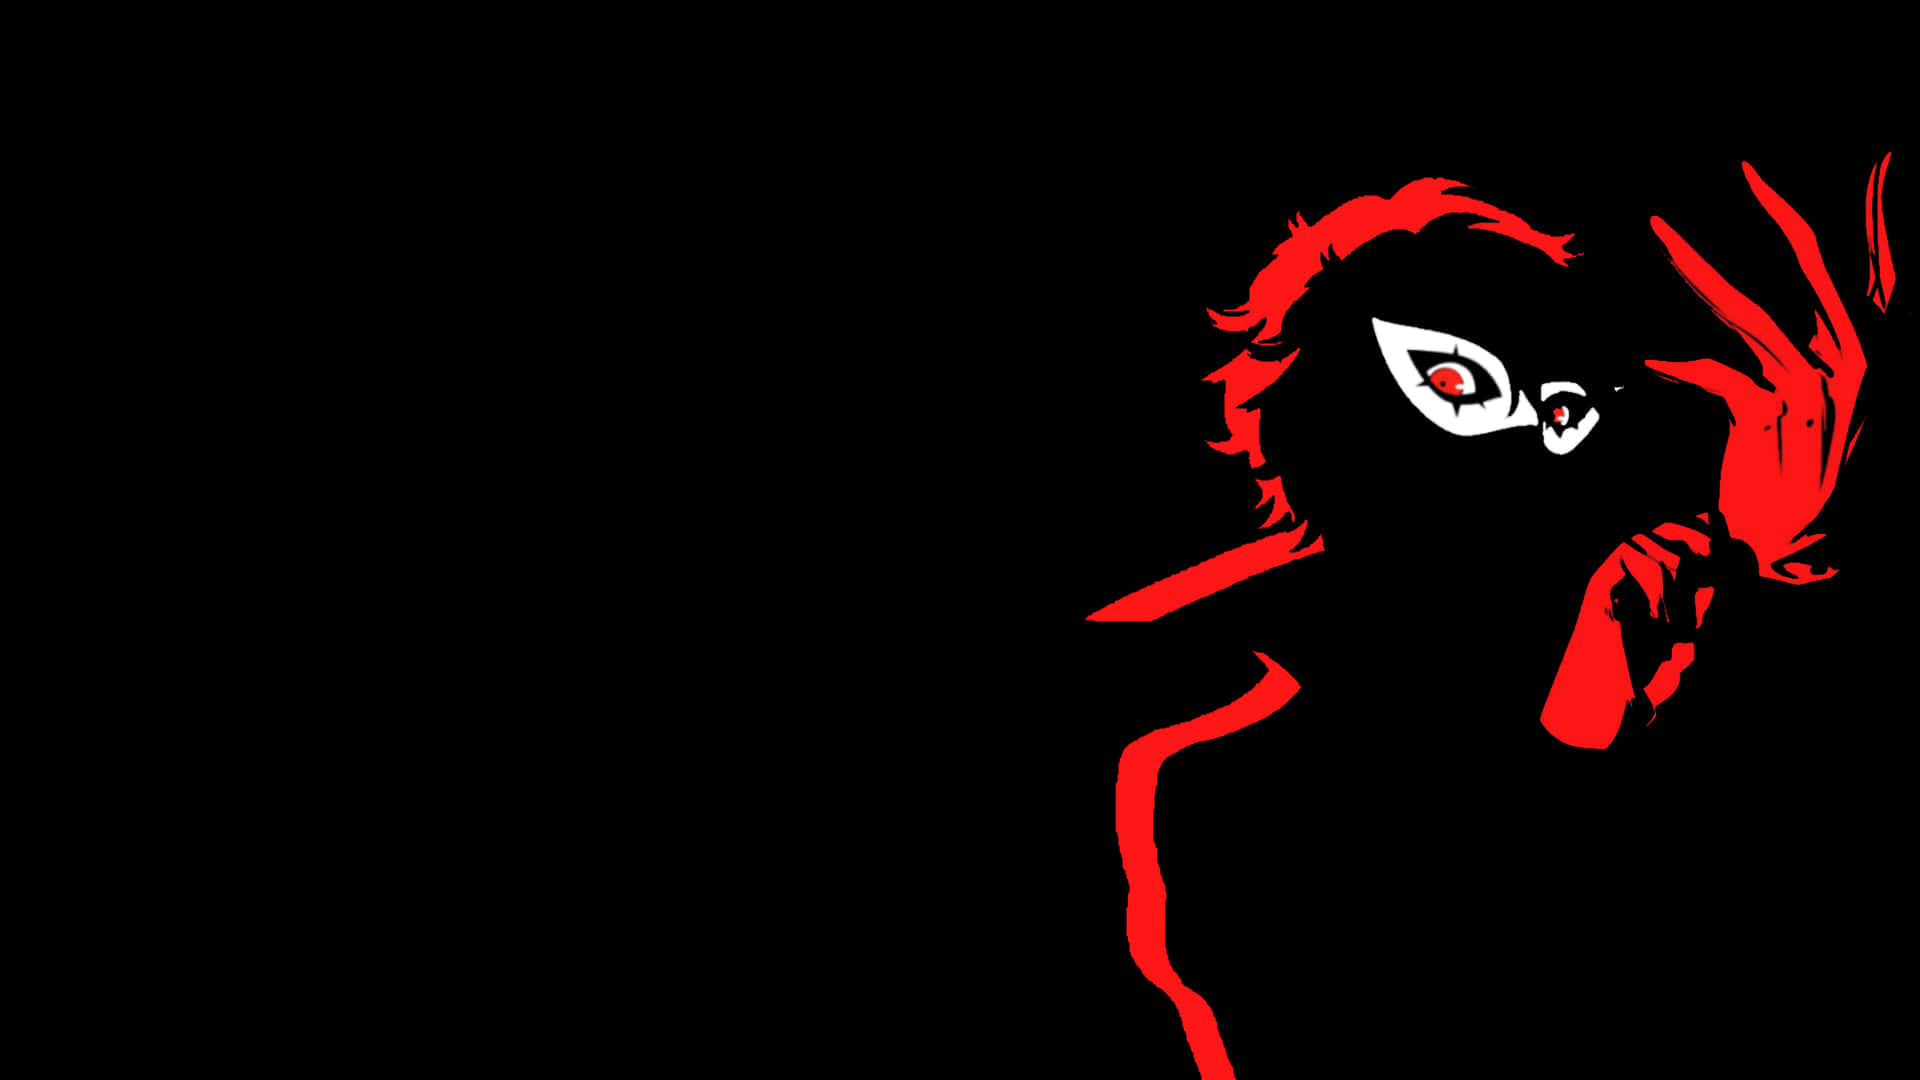 The iconic logo of the RPG game "Persona 5". Wallpaper